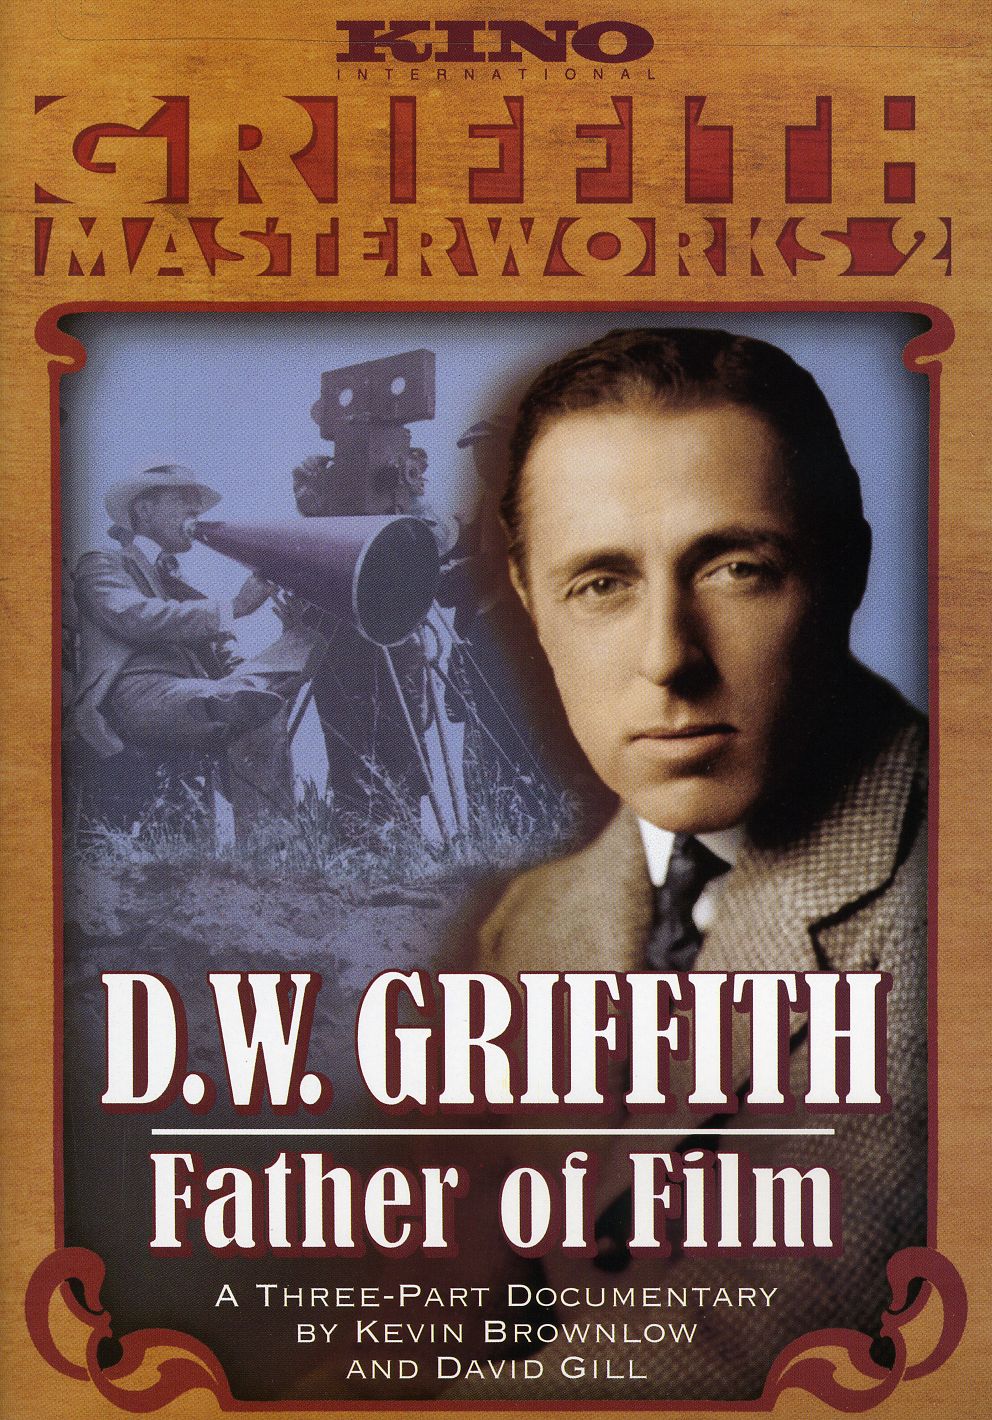 DW GRIFFITH: FATHER OF FILM